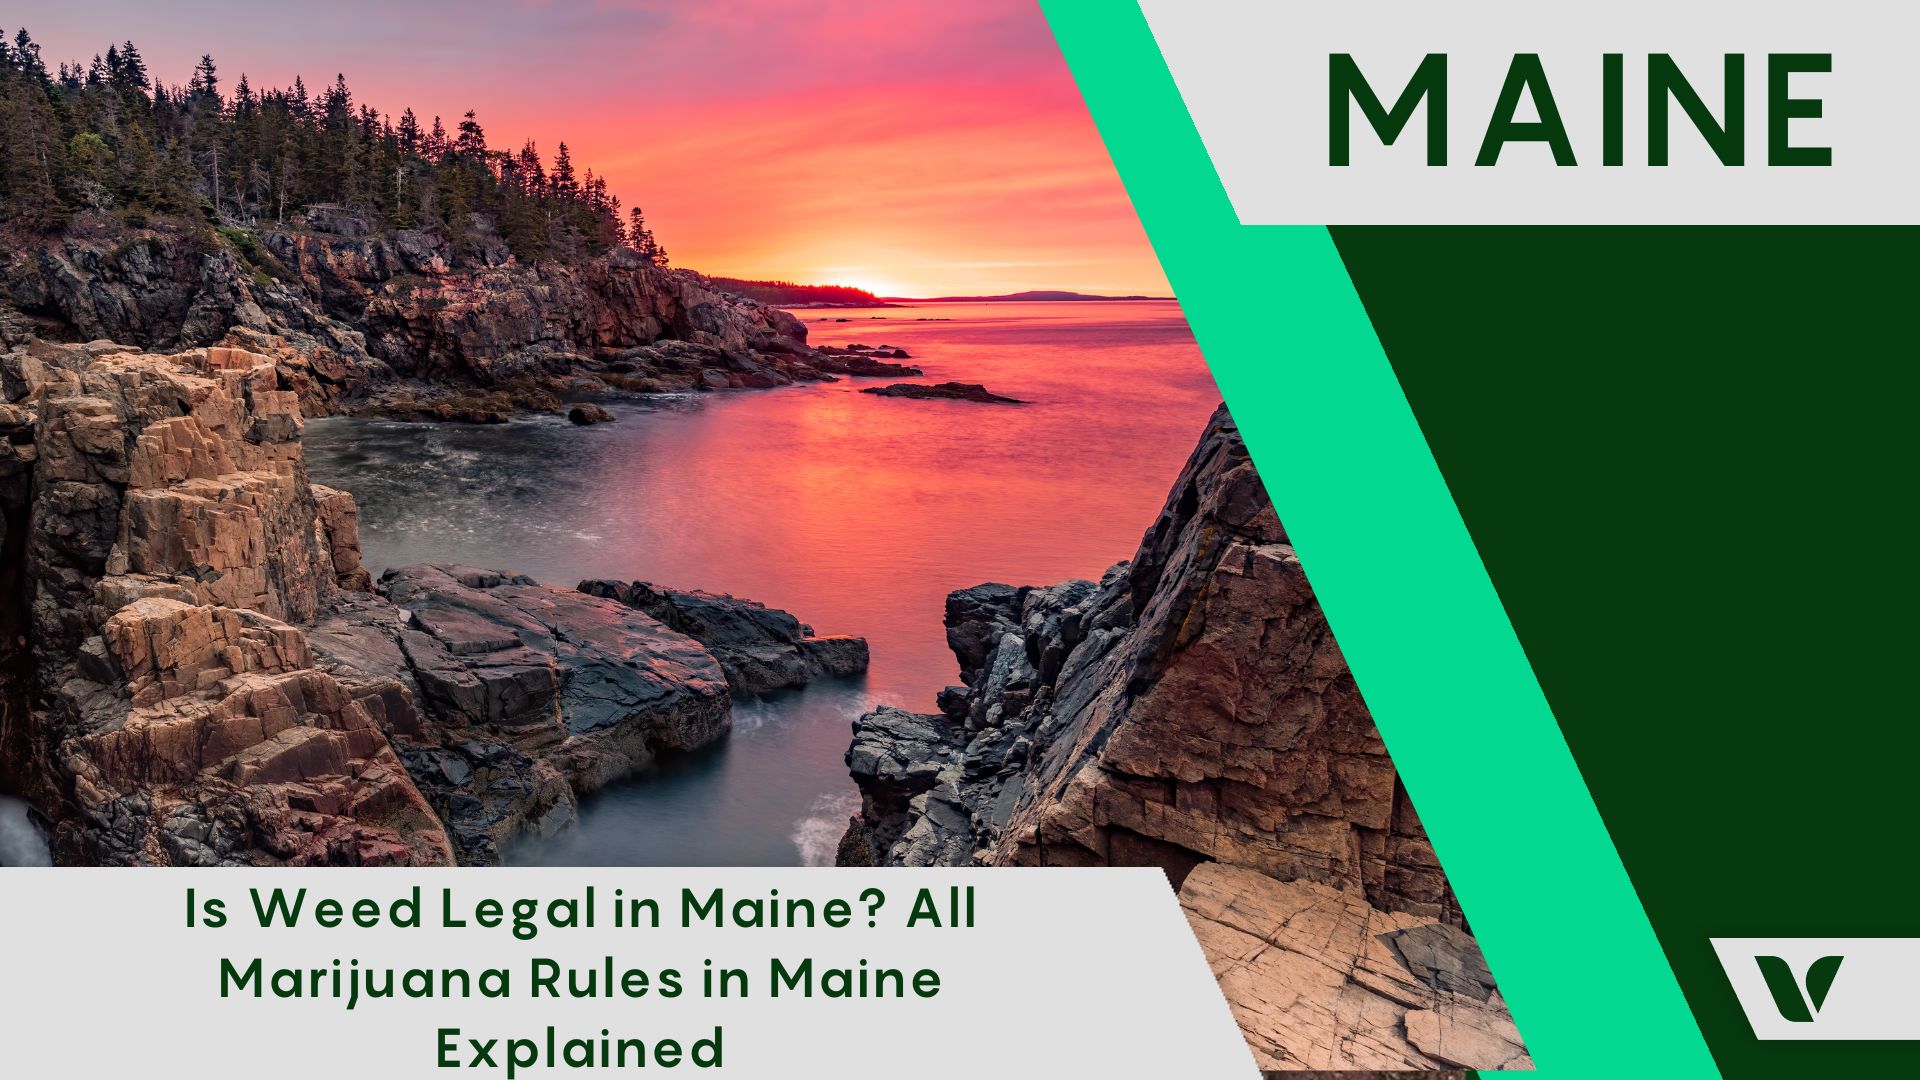 Is Weed Legal in Maine? All Marijuana Rules in Maine Explained